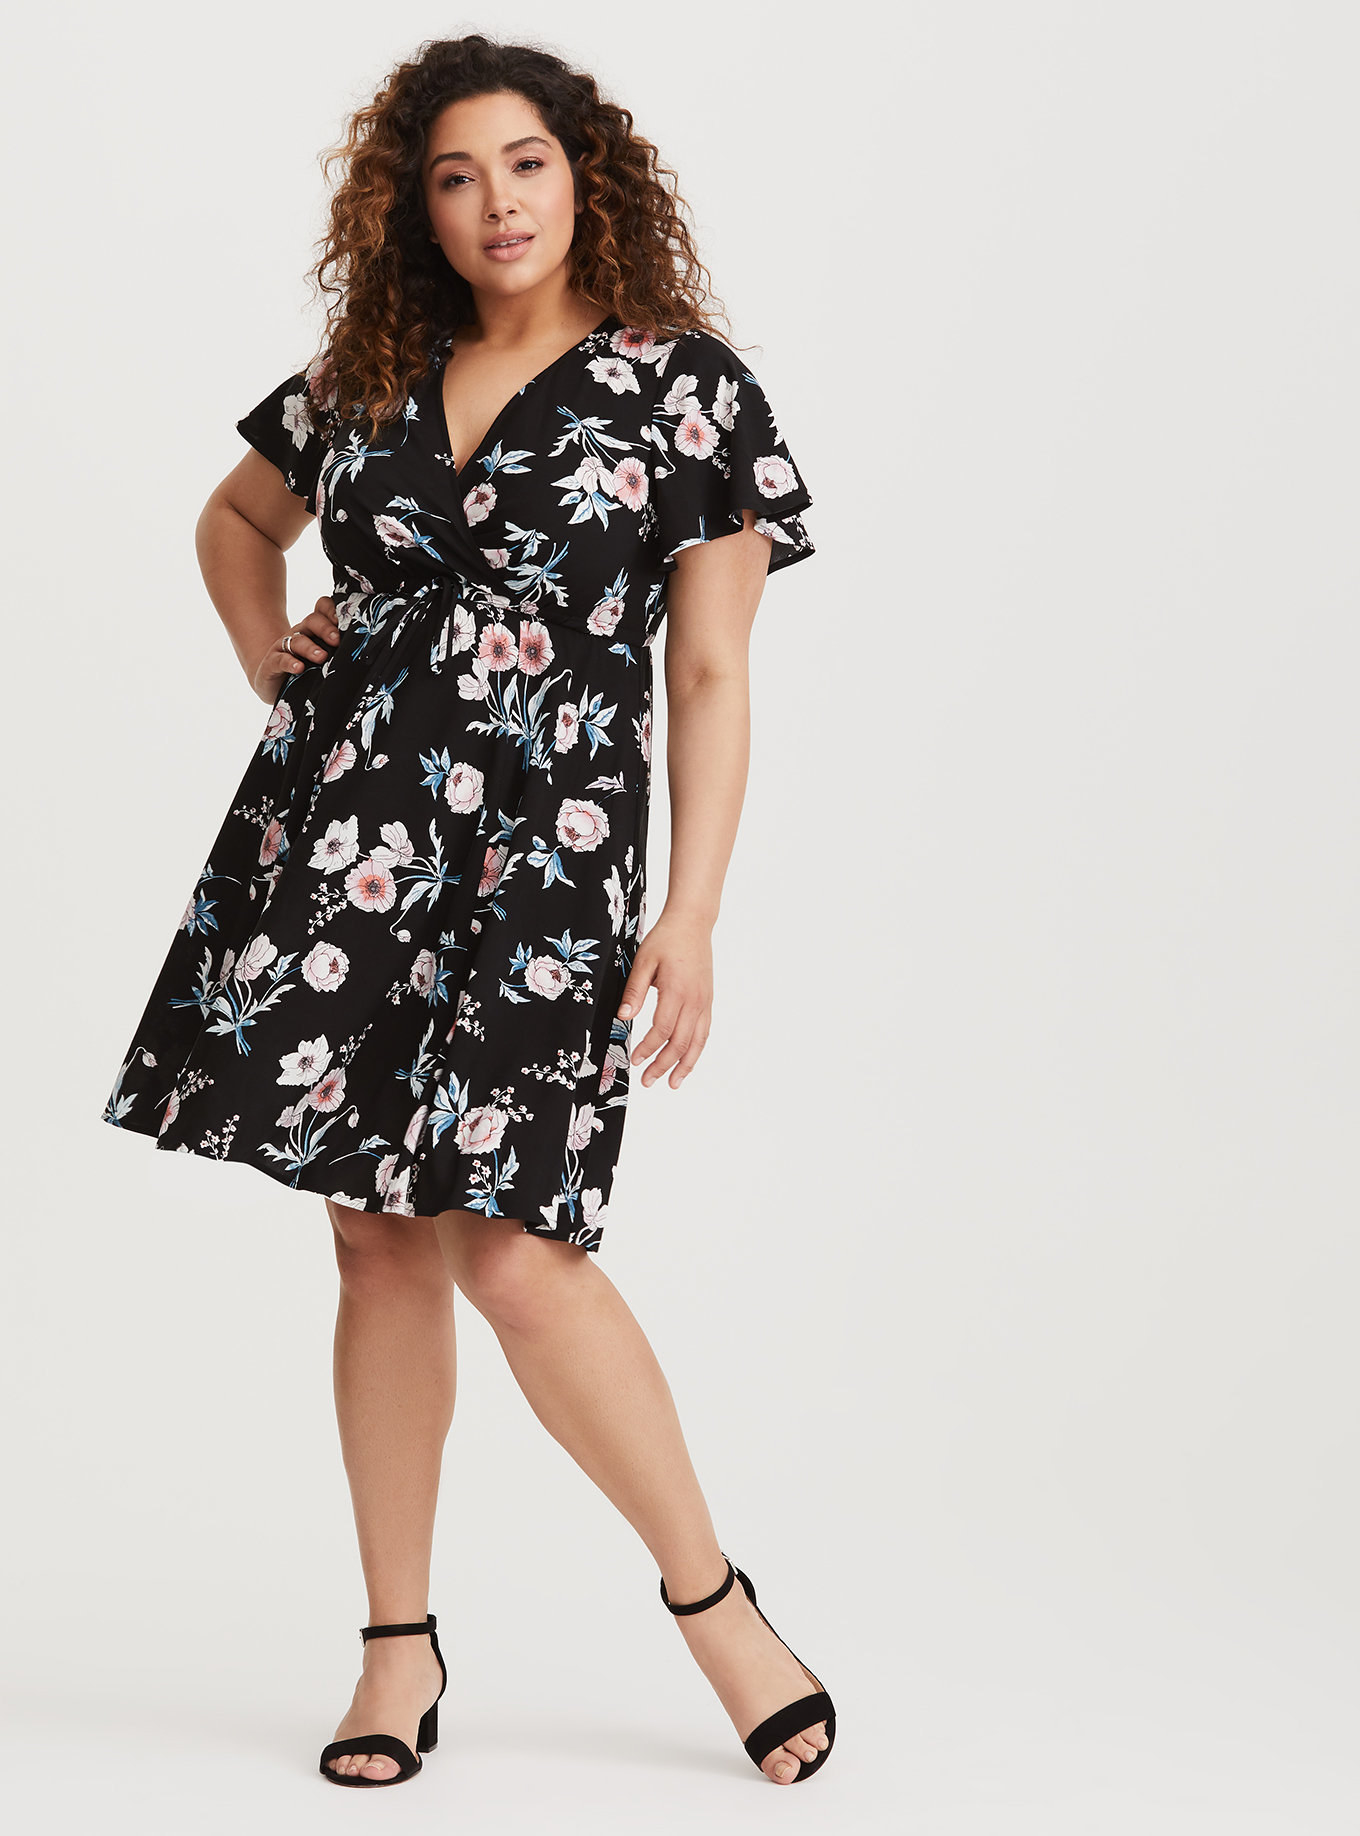 34 Gorgeous Floral Dresses You'll Wanna Plant On Your Body